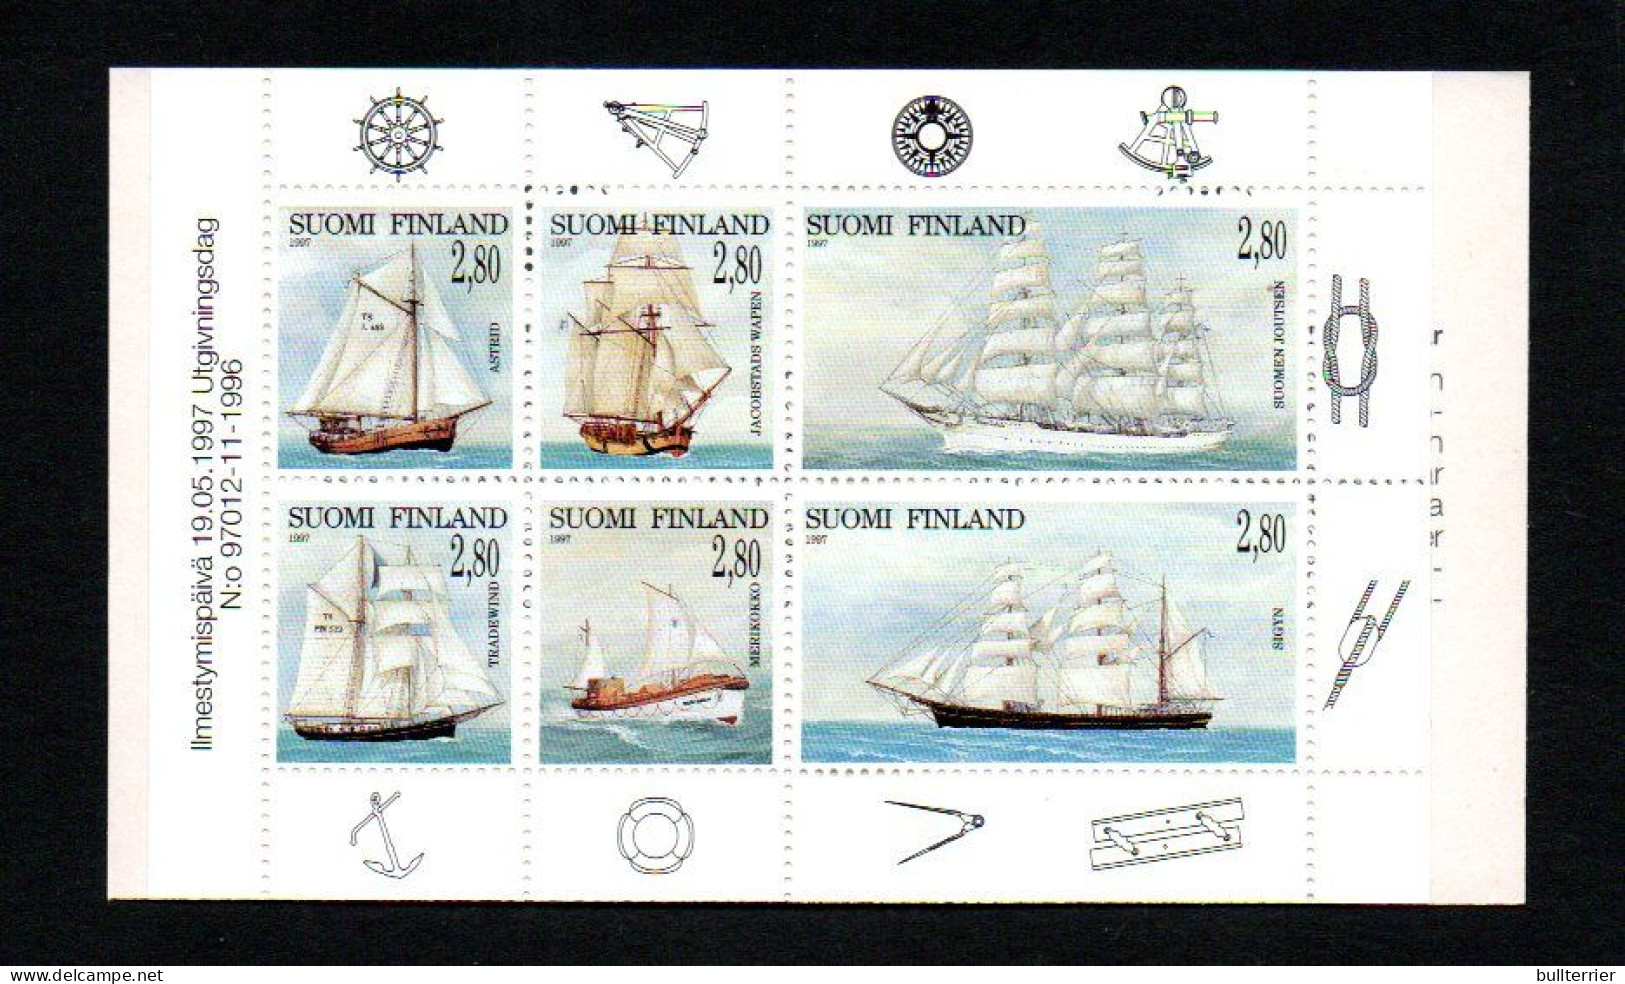 FINLAND - 1997 - Lifeboatd  Centenary Booklet Complete Mint Never Hinged, Sg Cat £21 - Libretti